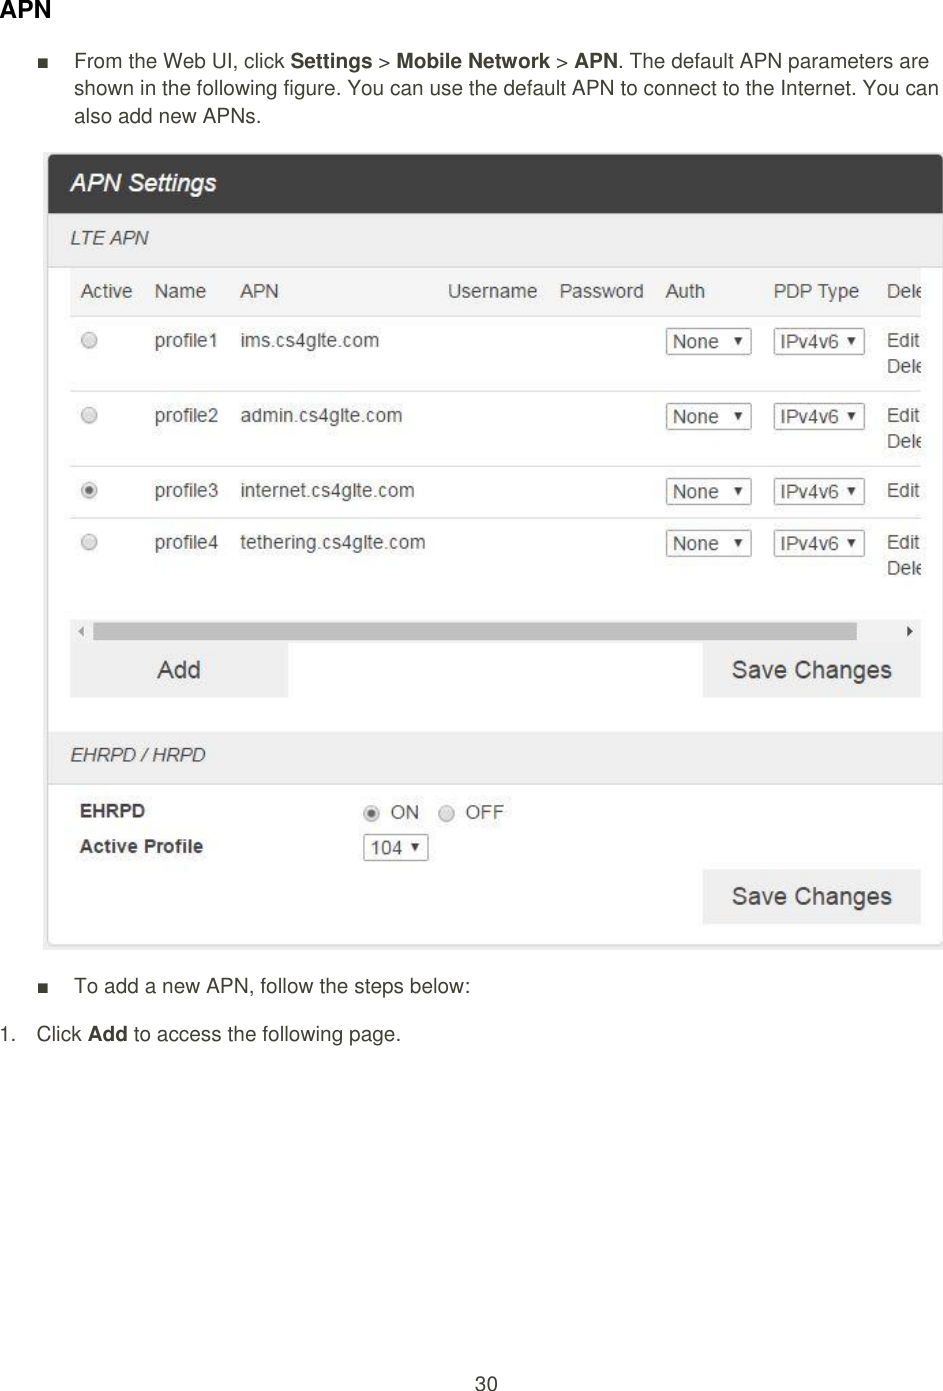 30  APN ■  From the Web UI, click Settings &gt; Mobile Network &gt; APN. The default APN parameters are shown in the following figure. You can use the default APN to connect to the Internet. You can also add new APNs.  ■  To add a new APN, follow the steps below: 1.  Click Add to access the following page. 